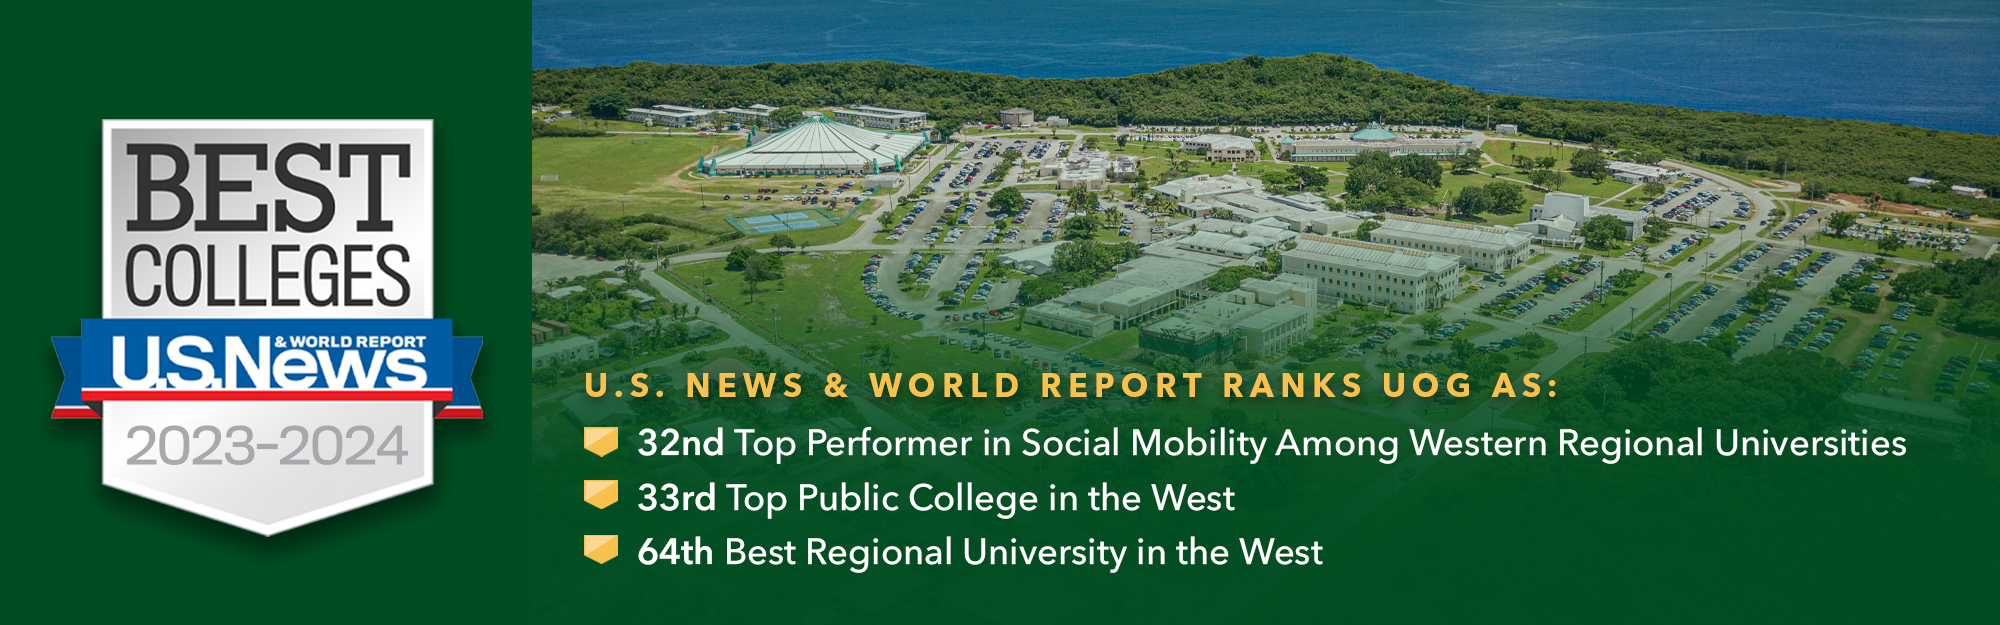 According to U.S. News and World Report, UOG ranks among Regional Universities in the West as the 30th top performer in social mobility, 36th top public college, and 70th best regional university in the West.